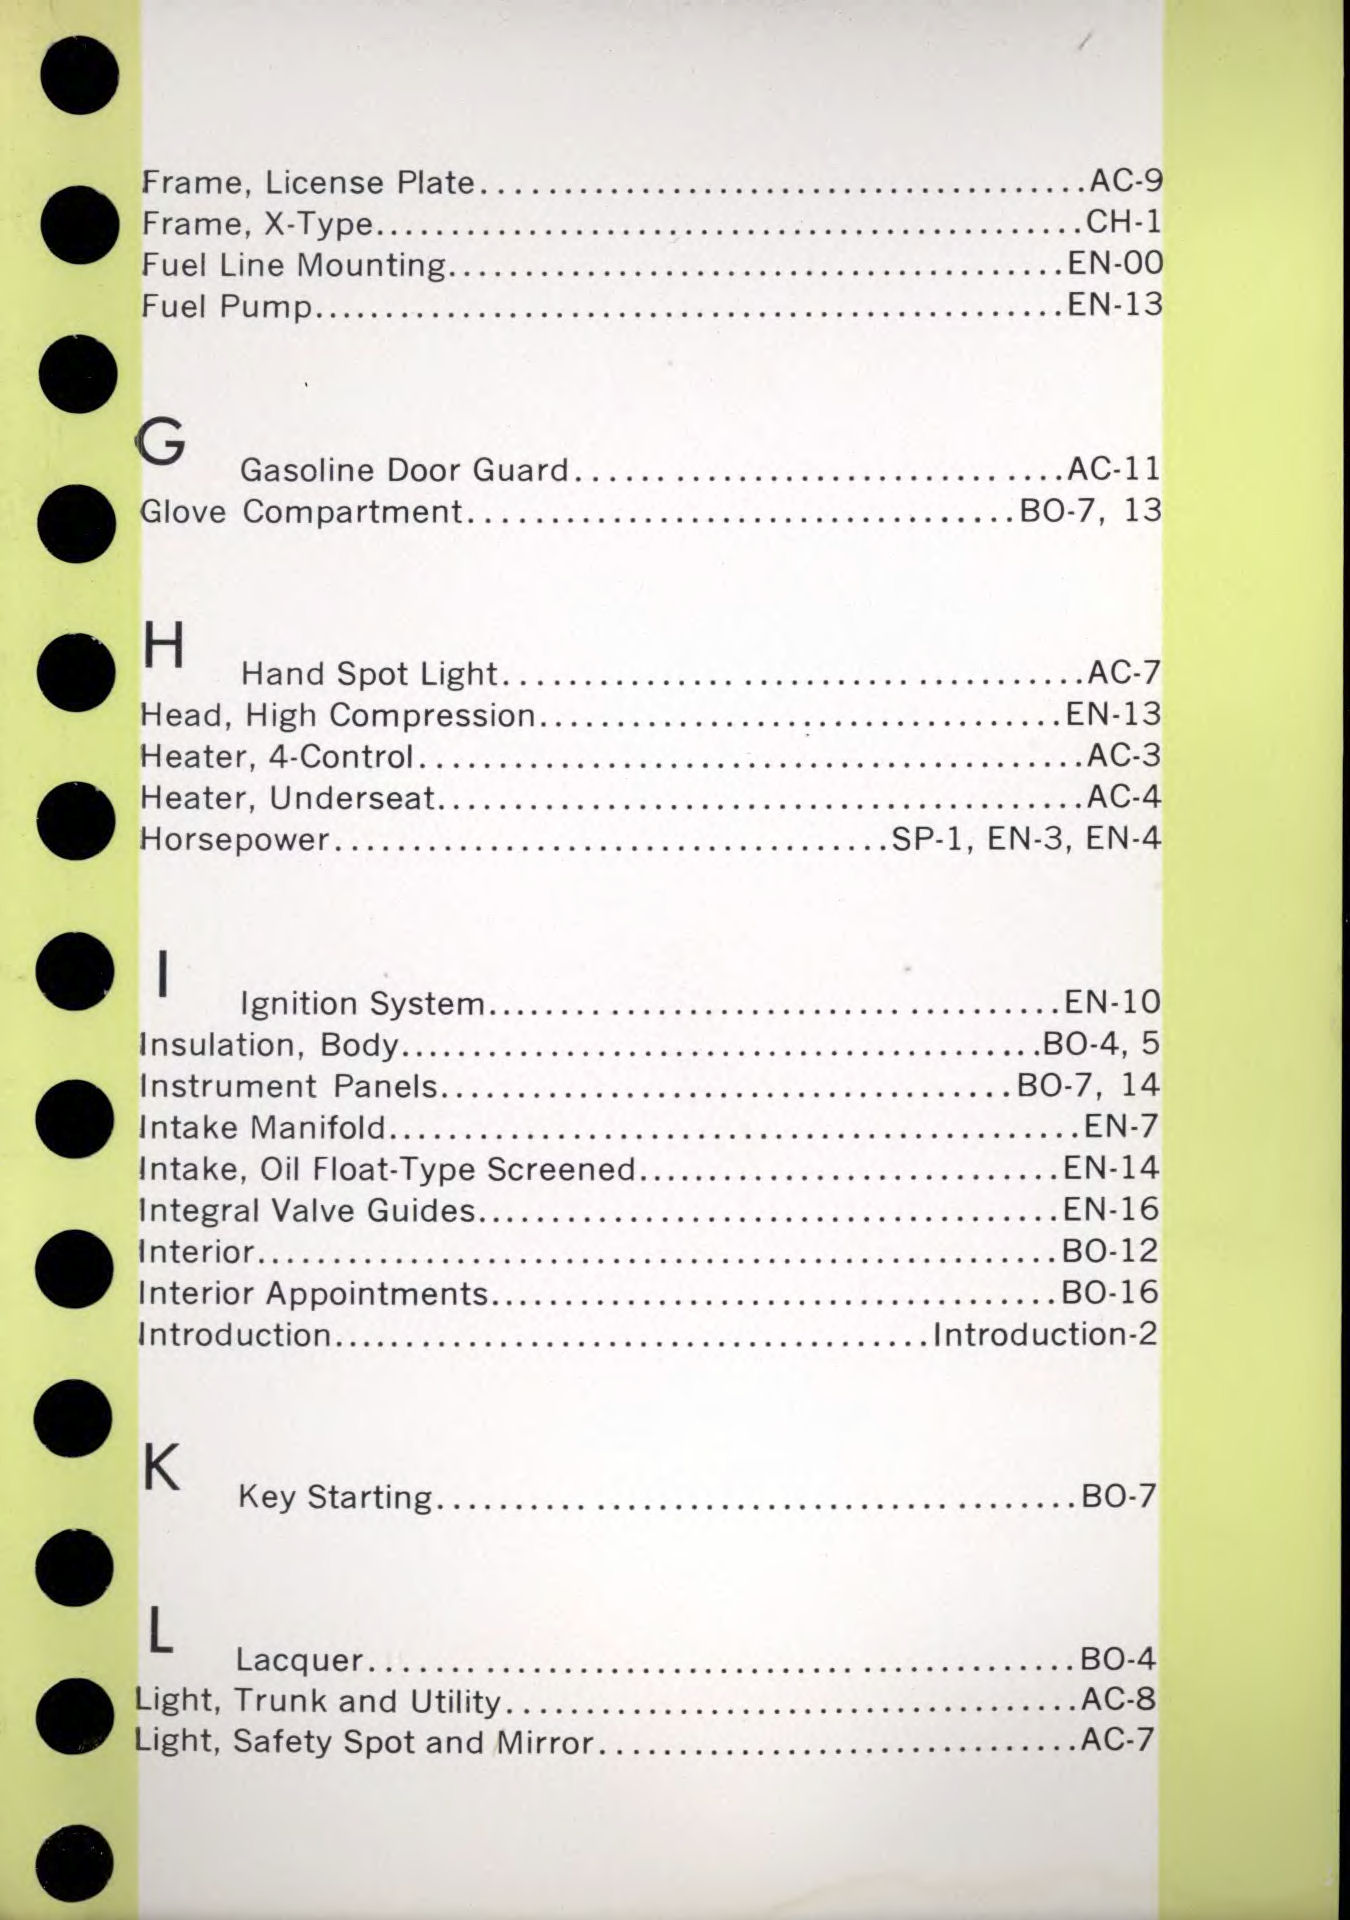 1956 Packard Data Book Page 24